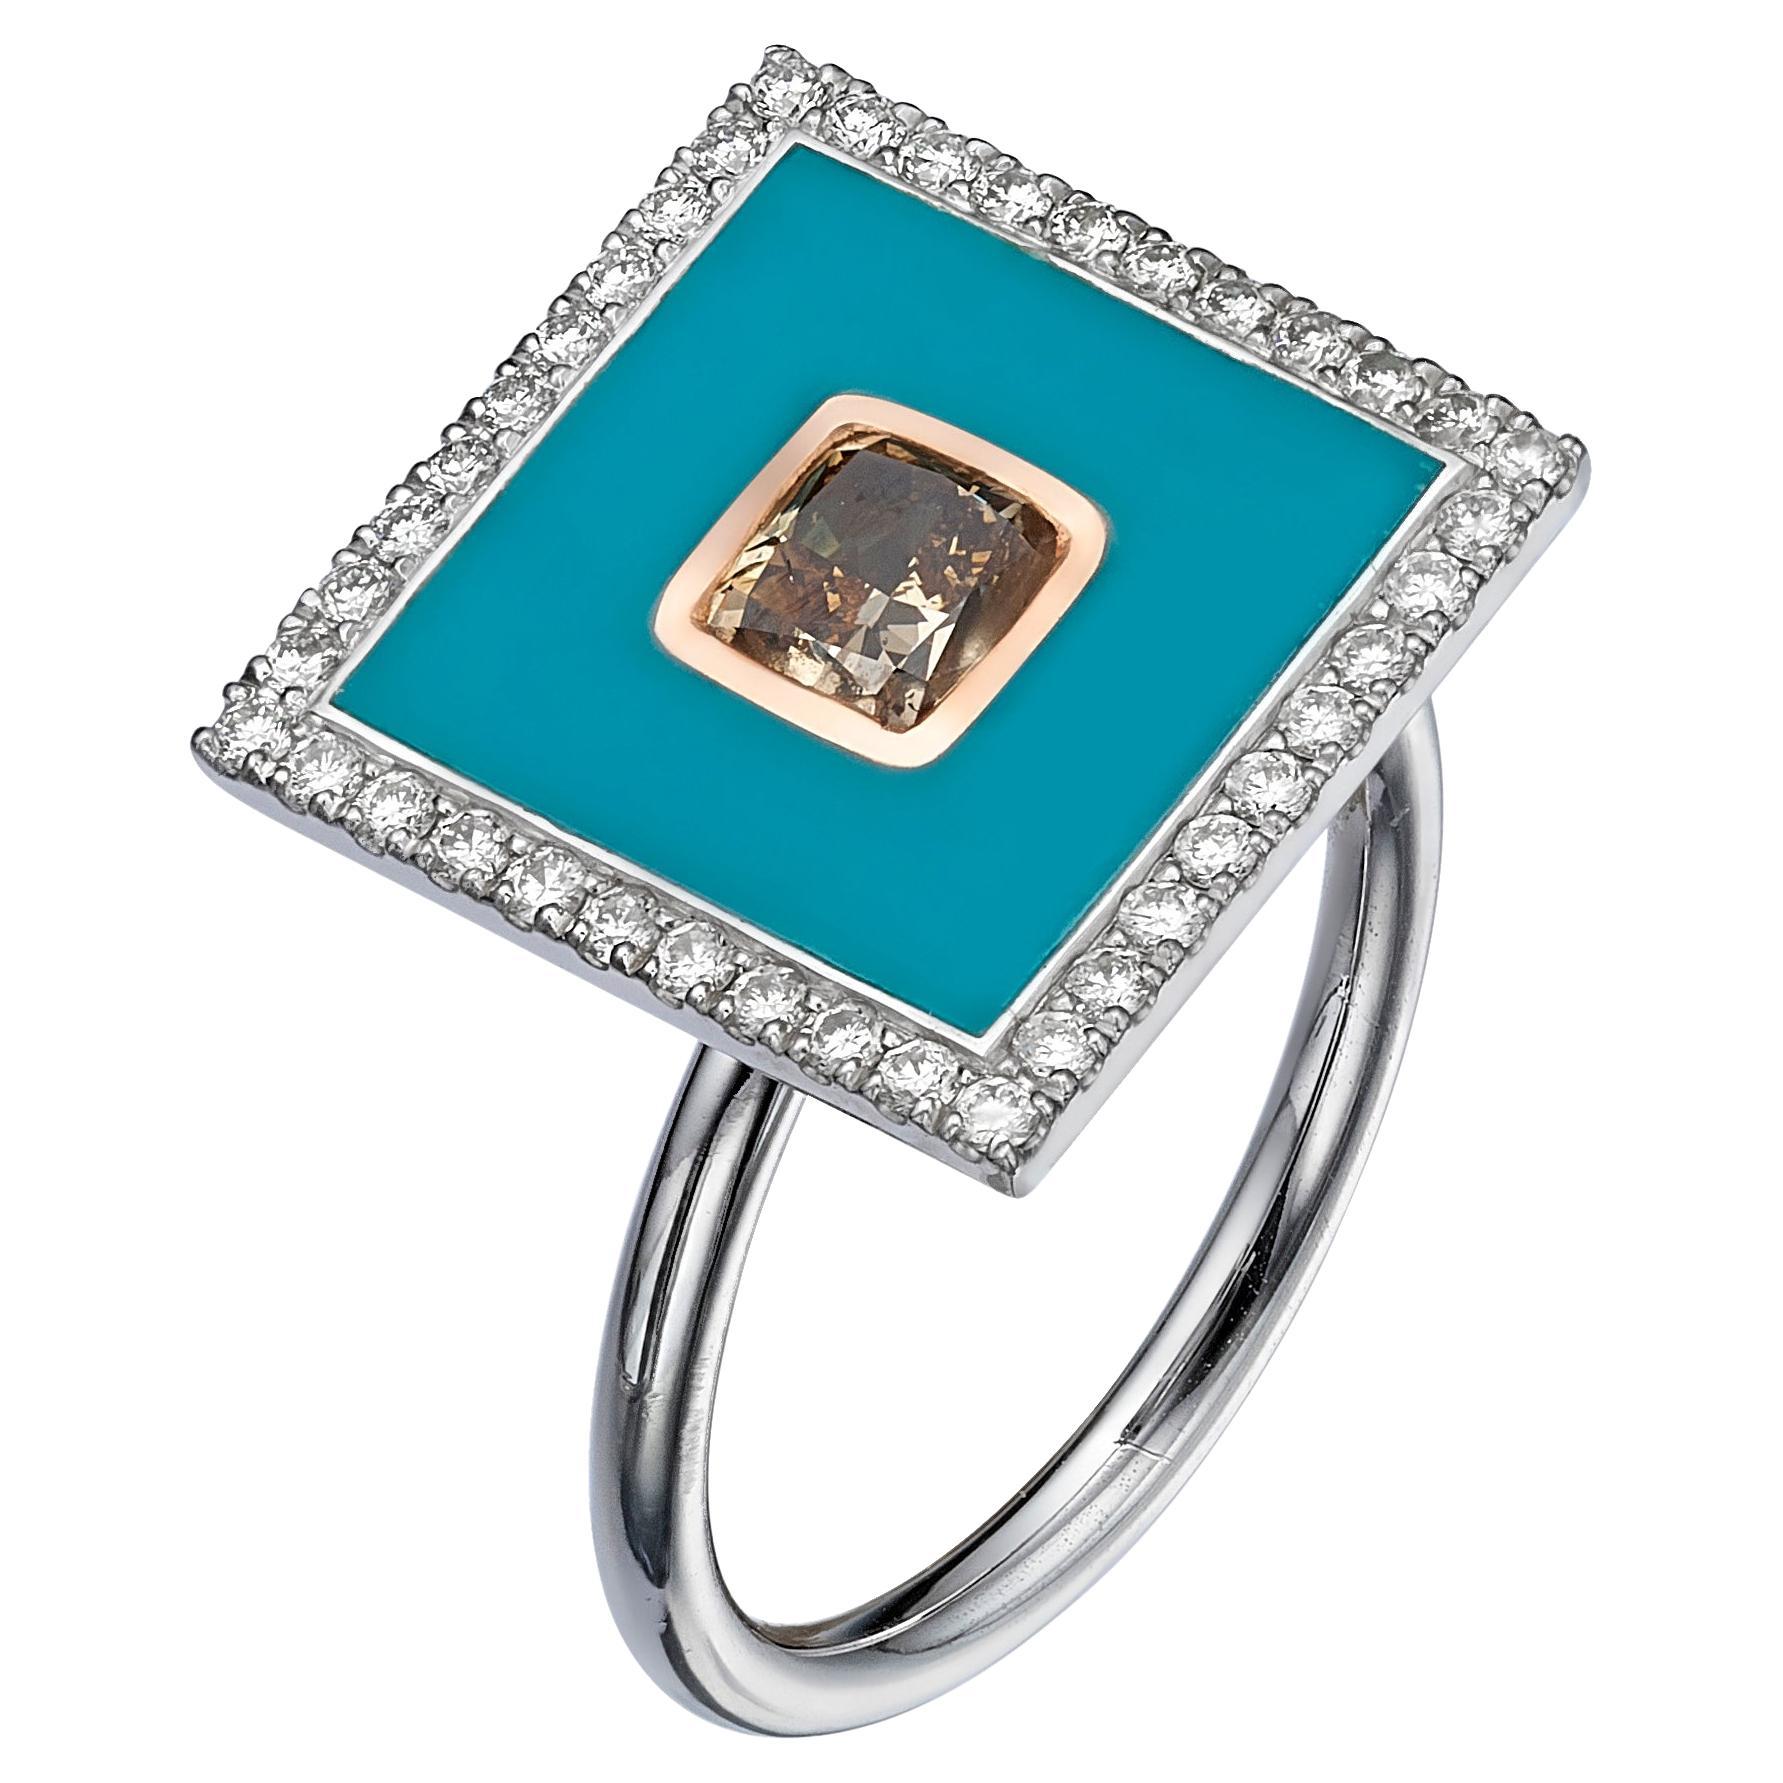 Venice Collection: Square-Shaped 18k White Gold Diamond Ring with Blue Enamel For Sale